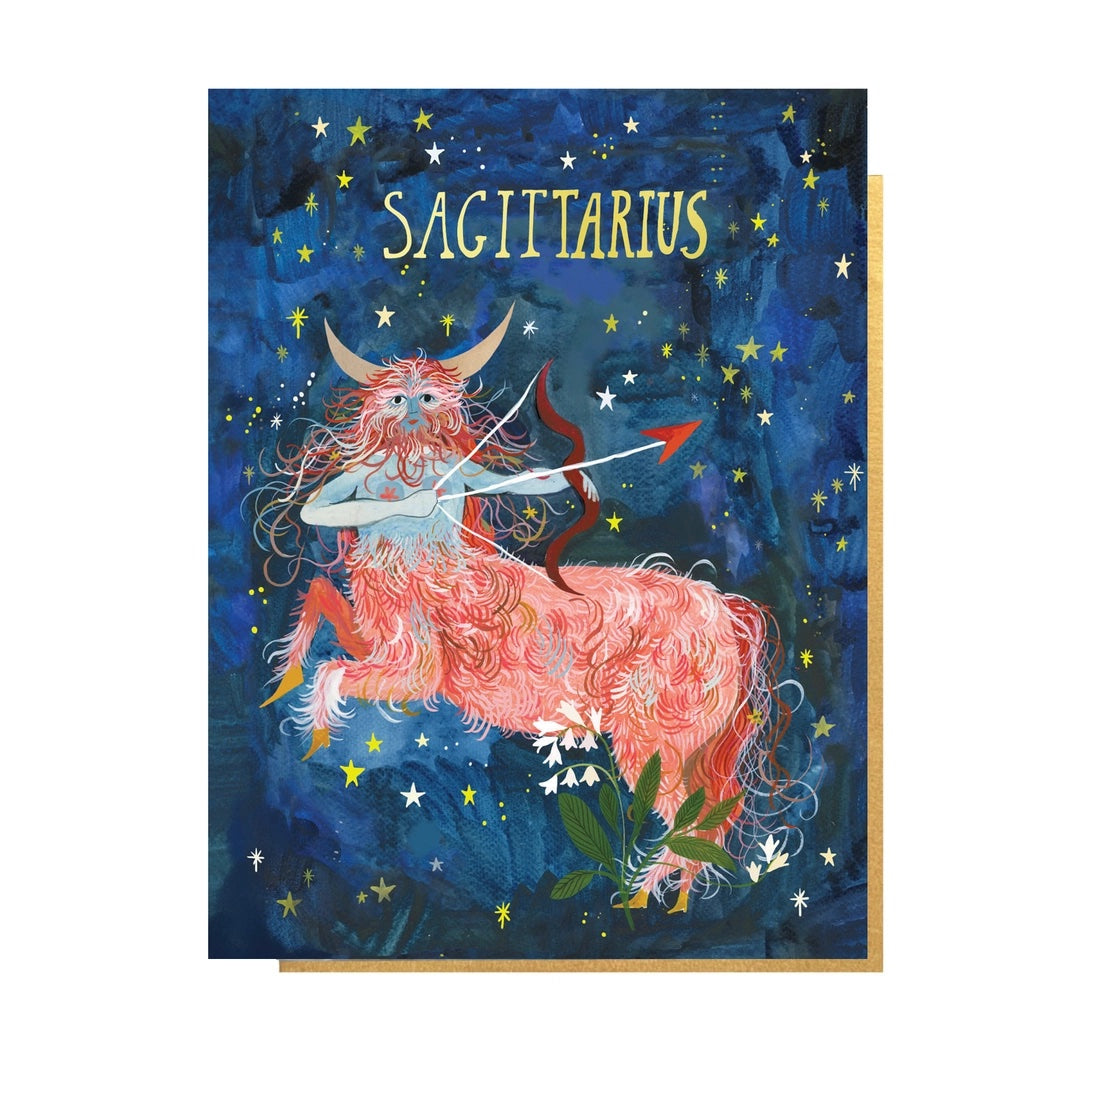 Folding card with illustration of a centaur archer and starry sky Sagittarius written above